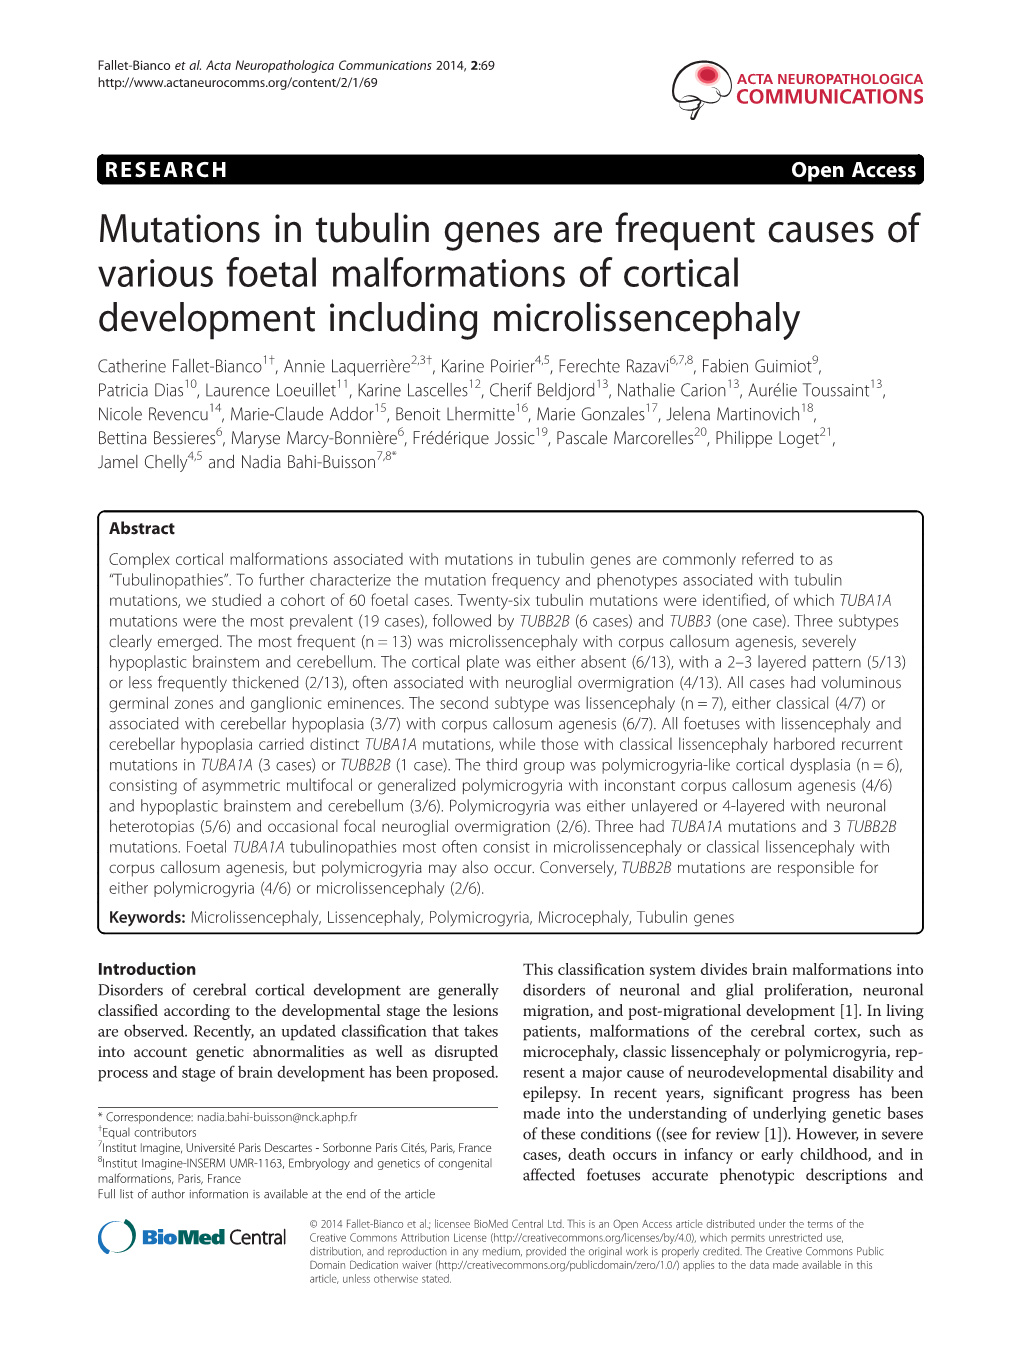 Mutations in Tubulin Genes Are Frequent Causes of Various Foetal